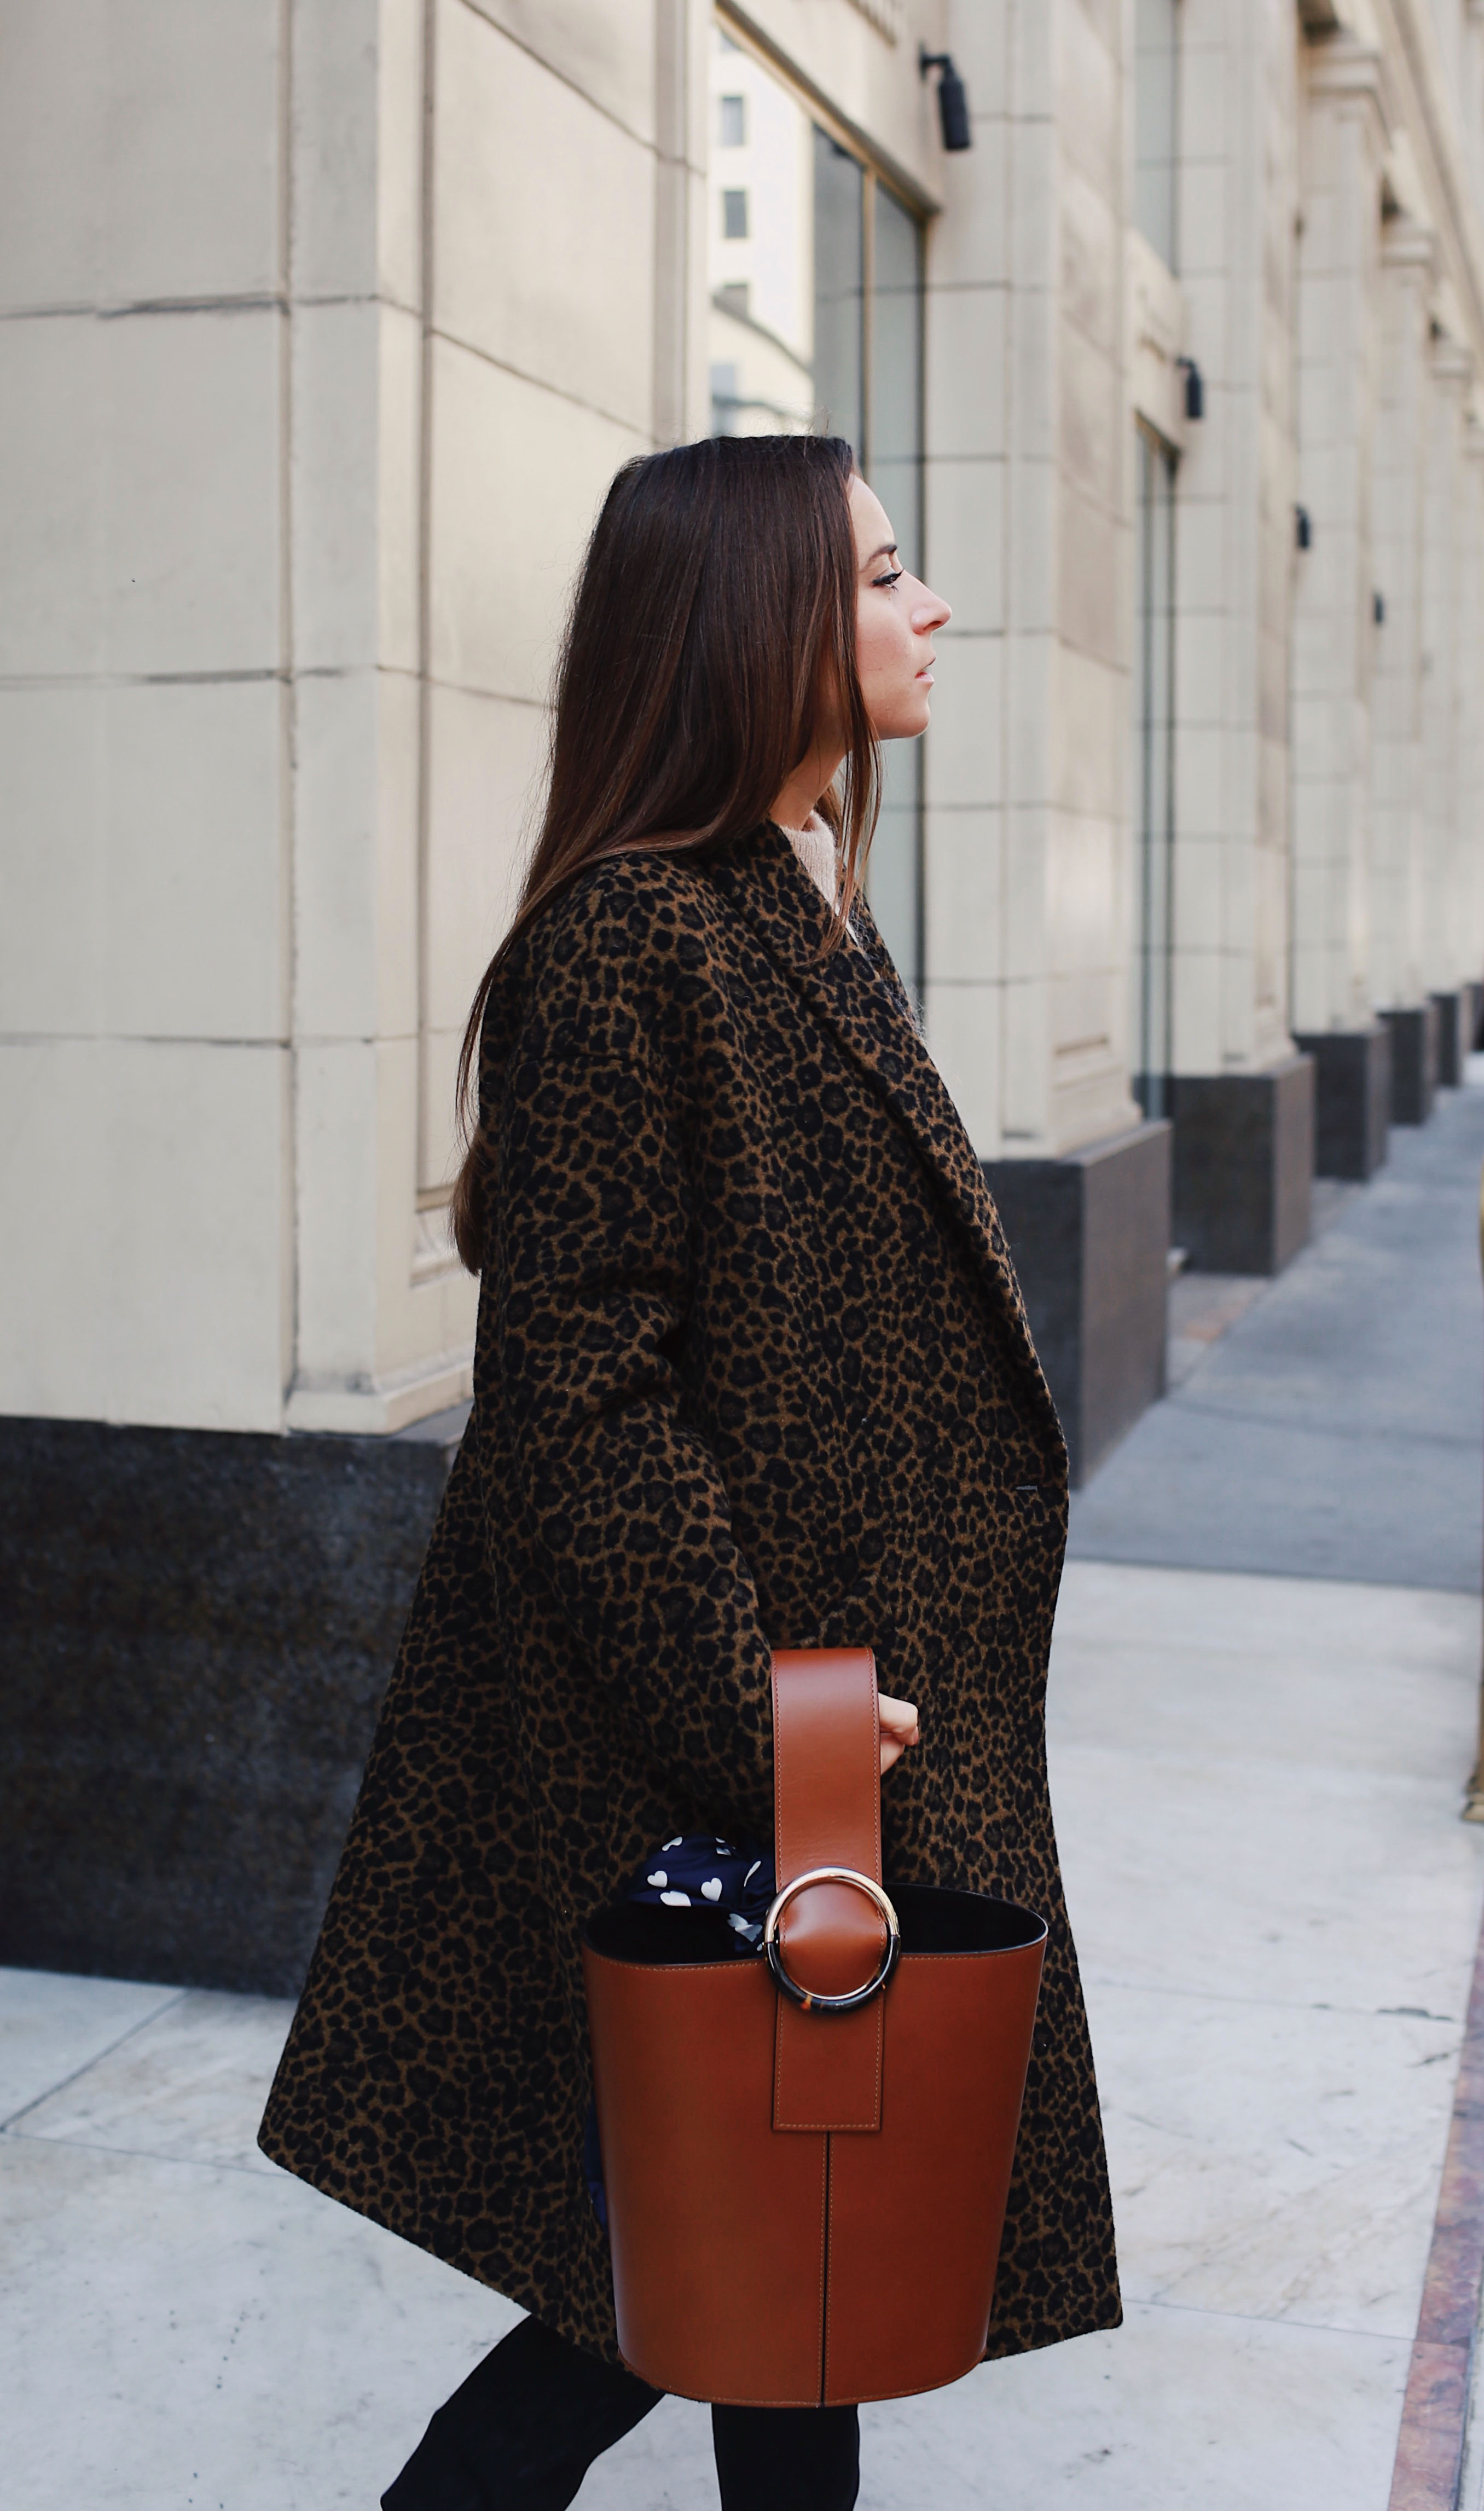 Fall Winter style: How to wear the animal print at work - Selection of my favorite leopard prints. Here wearing a Leopard Coat Tara Jarmon